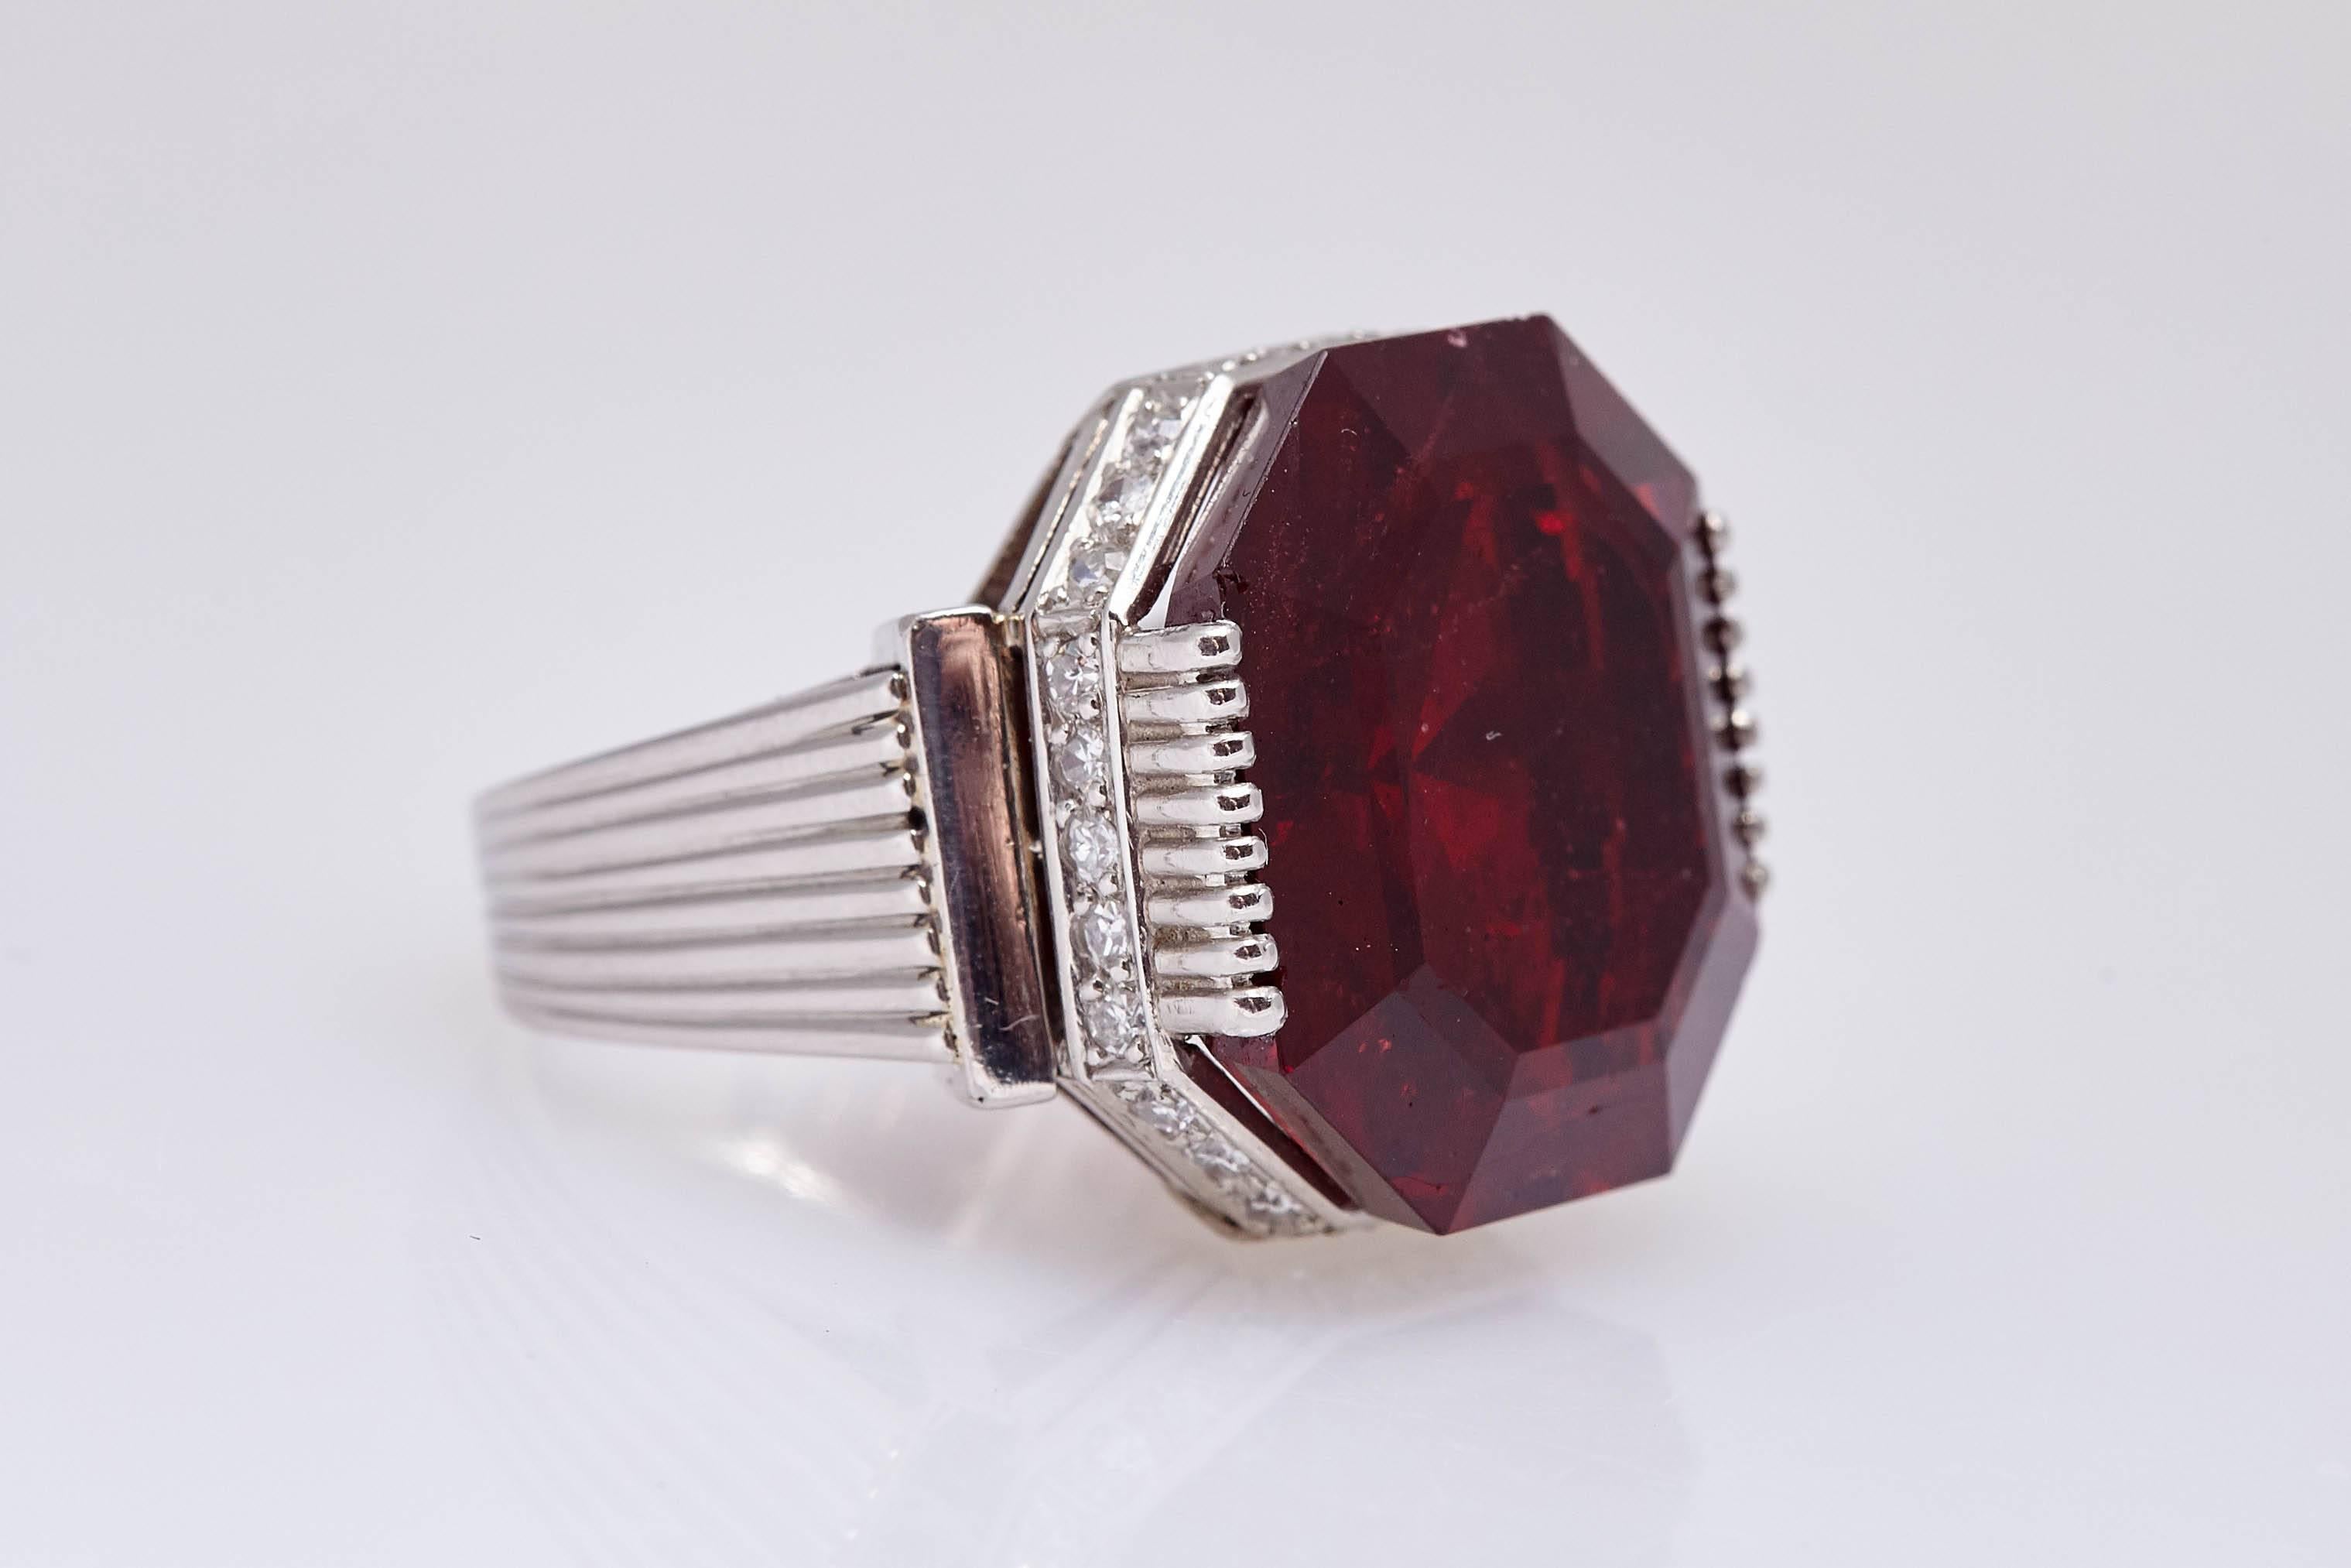 A ring in platinum showcasing a spinel of exceptional color (octagonal step cut, 22.08 cts) and 30 old cut diamonds (total weight app. 1 ct). Spinel is AGL certified as natural. Mounted on platinum (Stamped Pt 950). Made in Italy, circa 1980